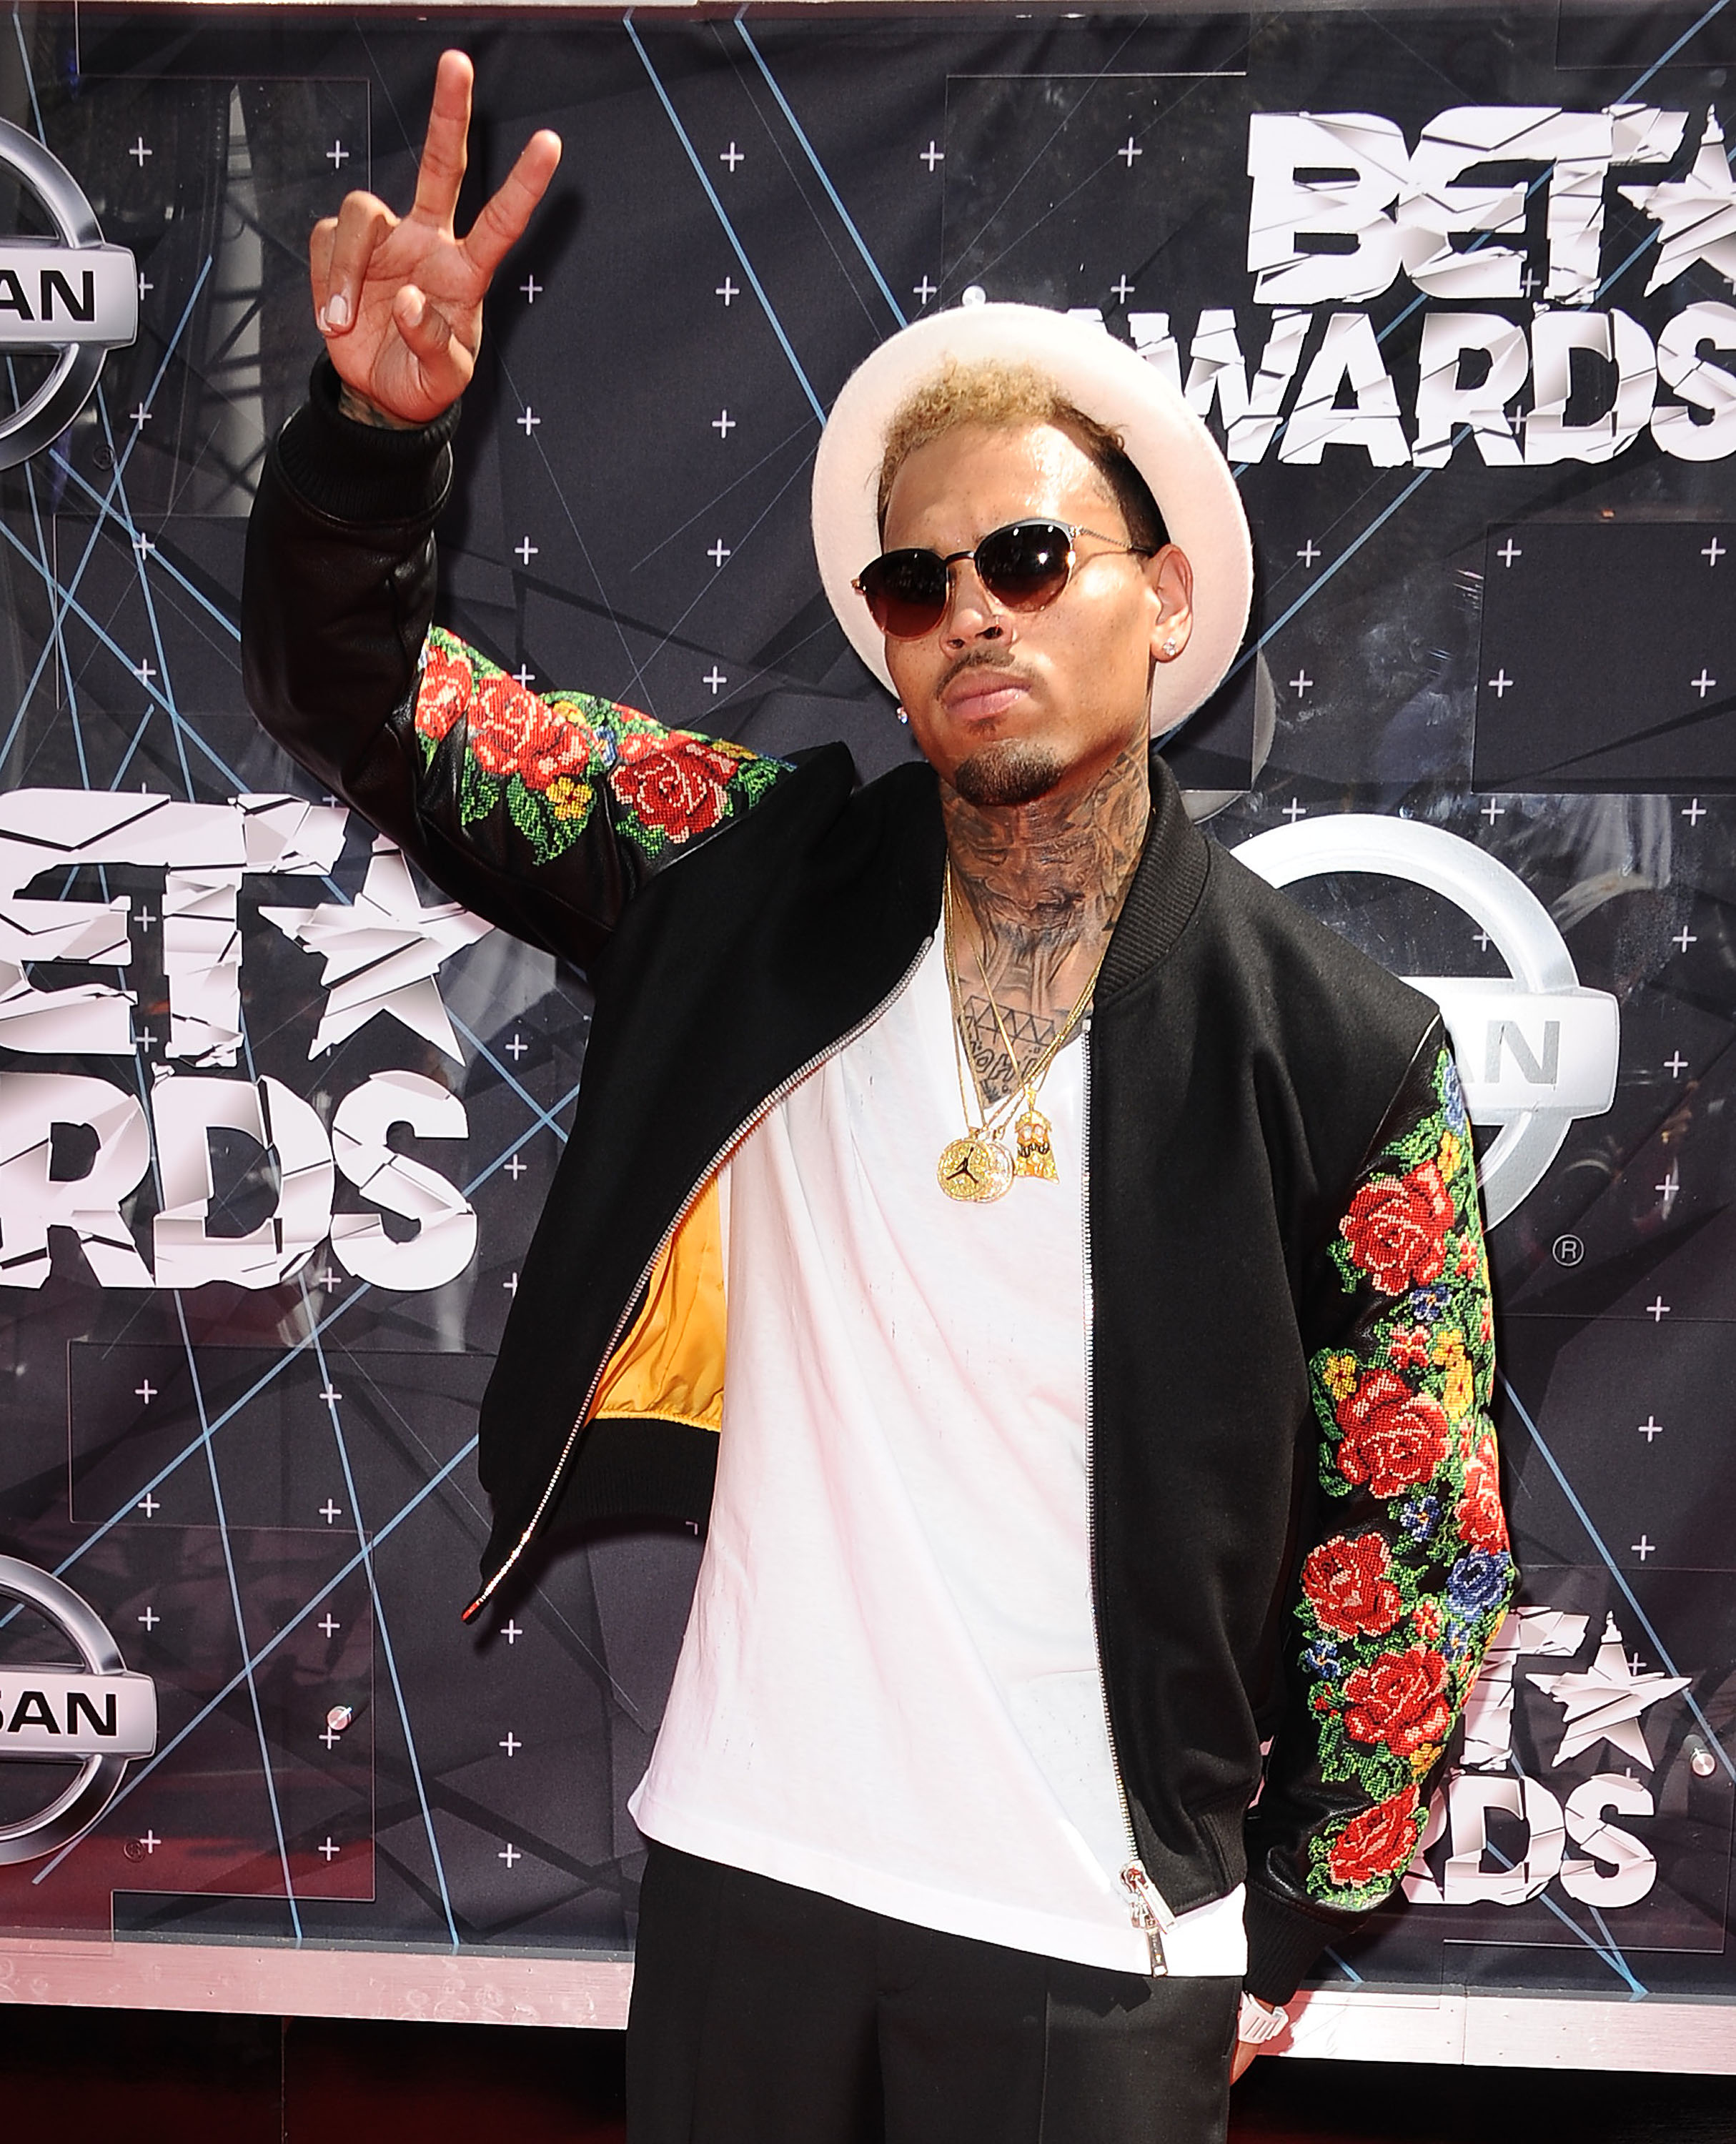 13 Lyric Refrences That Let Us Know Chris Brown's Sex Game Is 'About That Life'